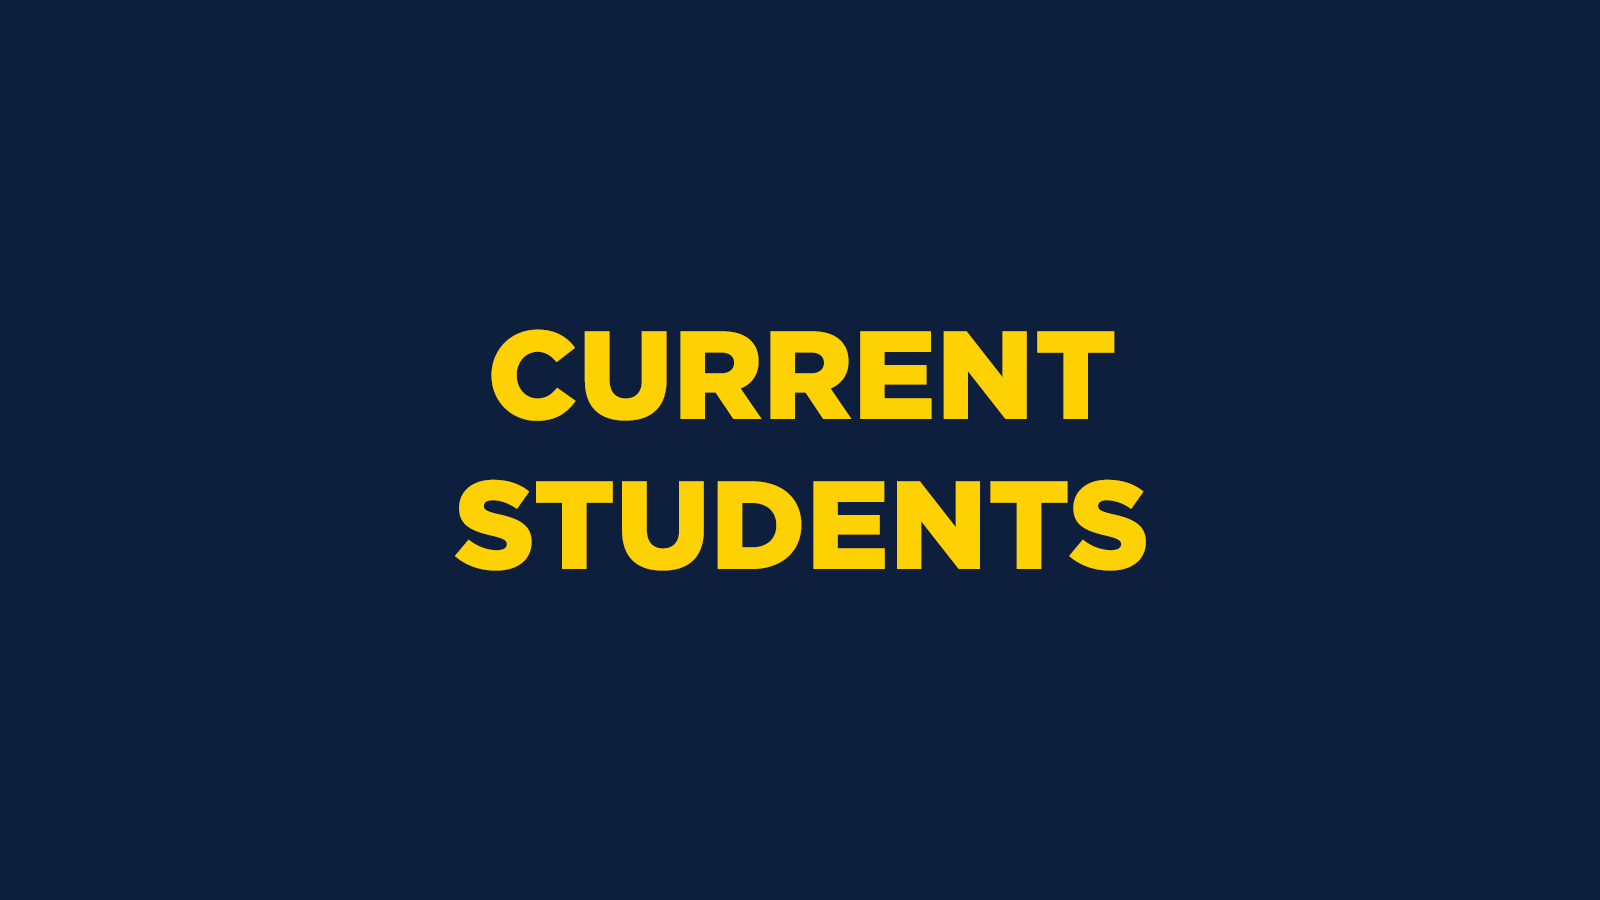 Services for Current Students